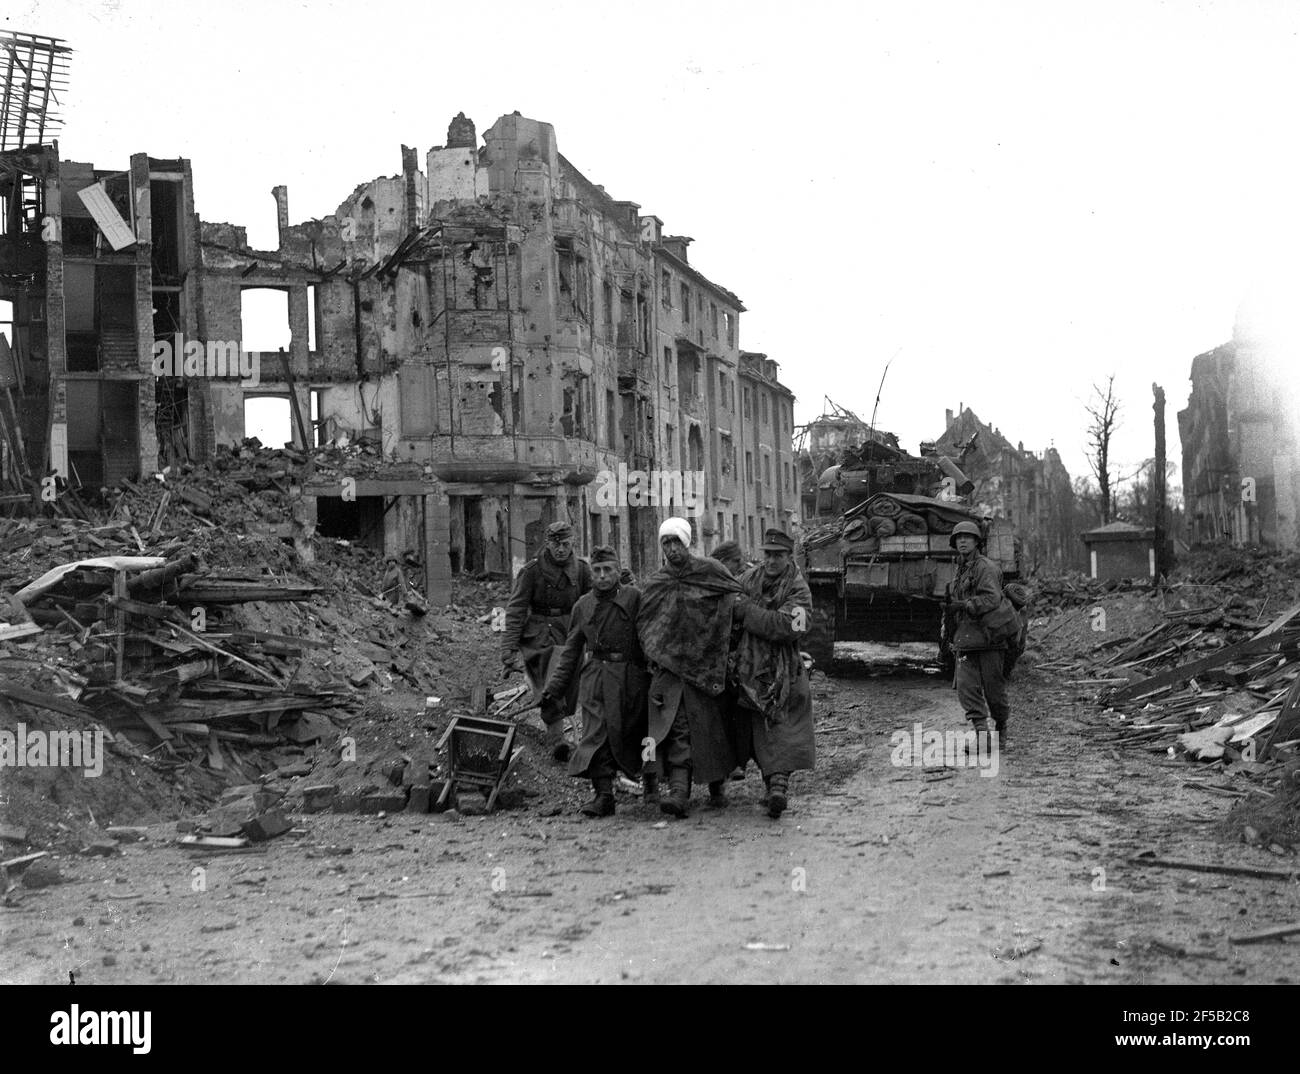 Cologne, Germany 1945 American troops escort injured captured German soldiers after they surrendered during World War Two following heavy bombing of the city. WW2 second world war. german defeat allied victory Deutschland 1940s surrender Europe European history destruction Stock Photo